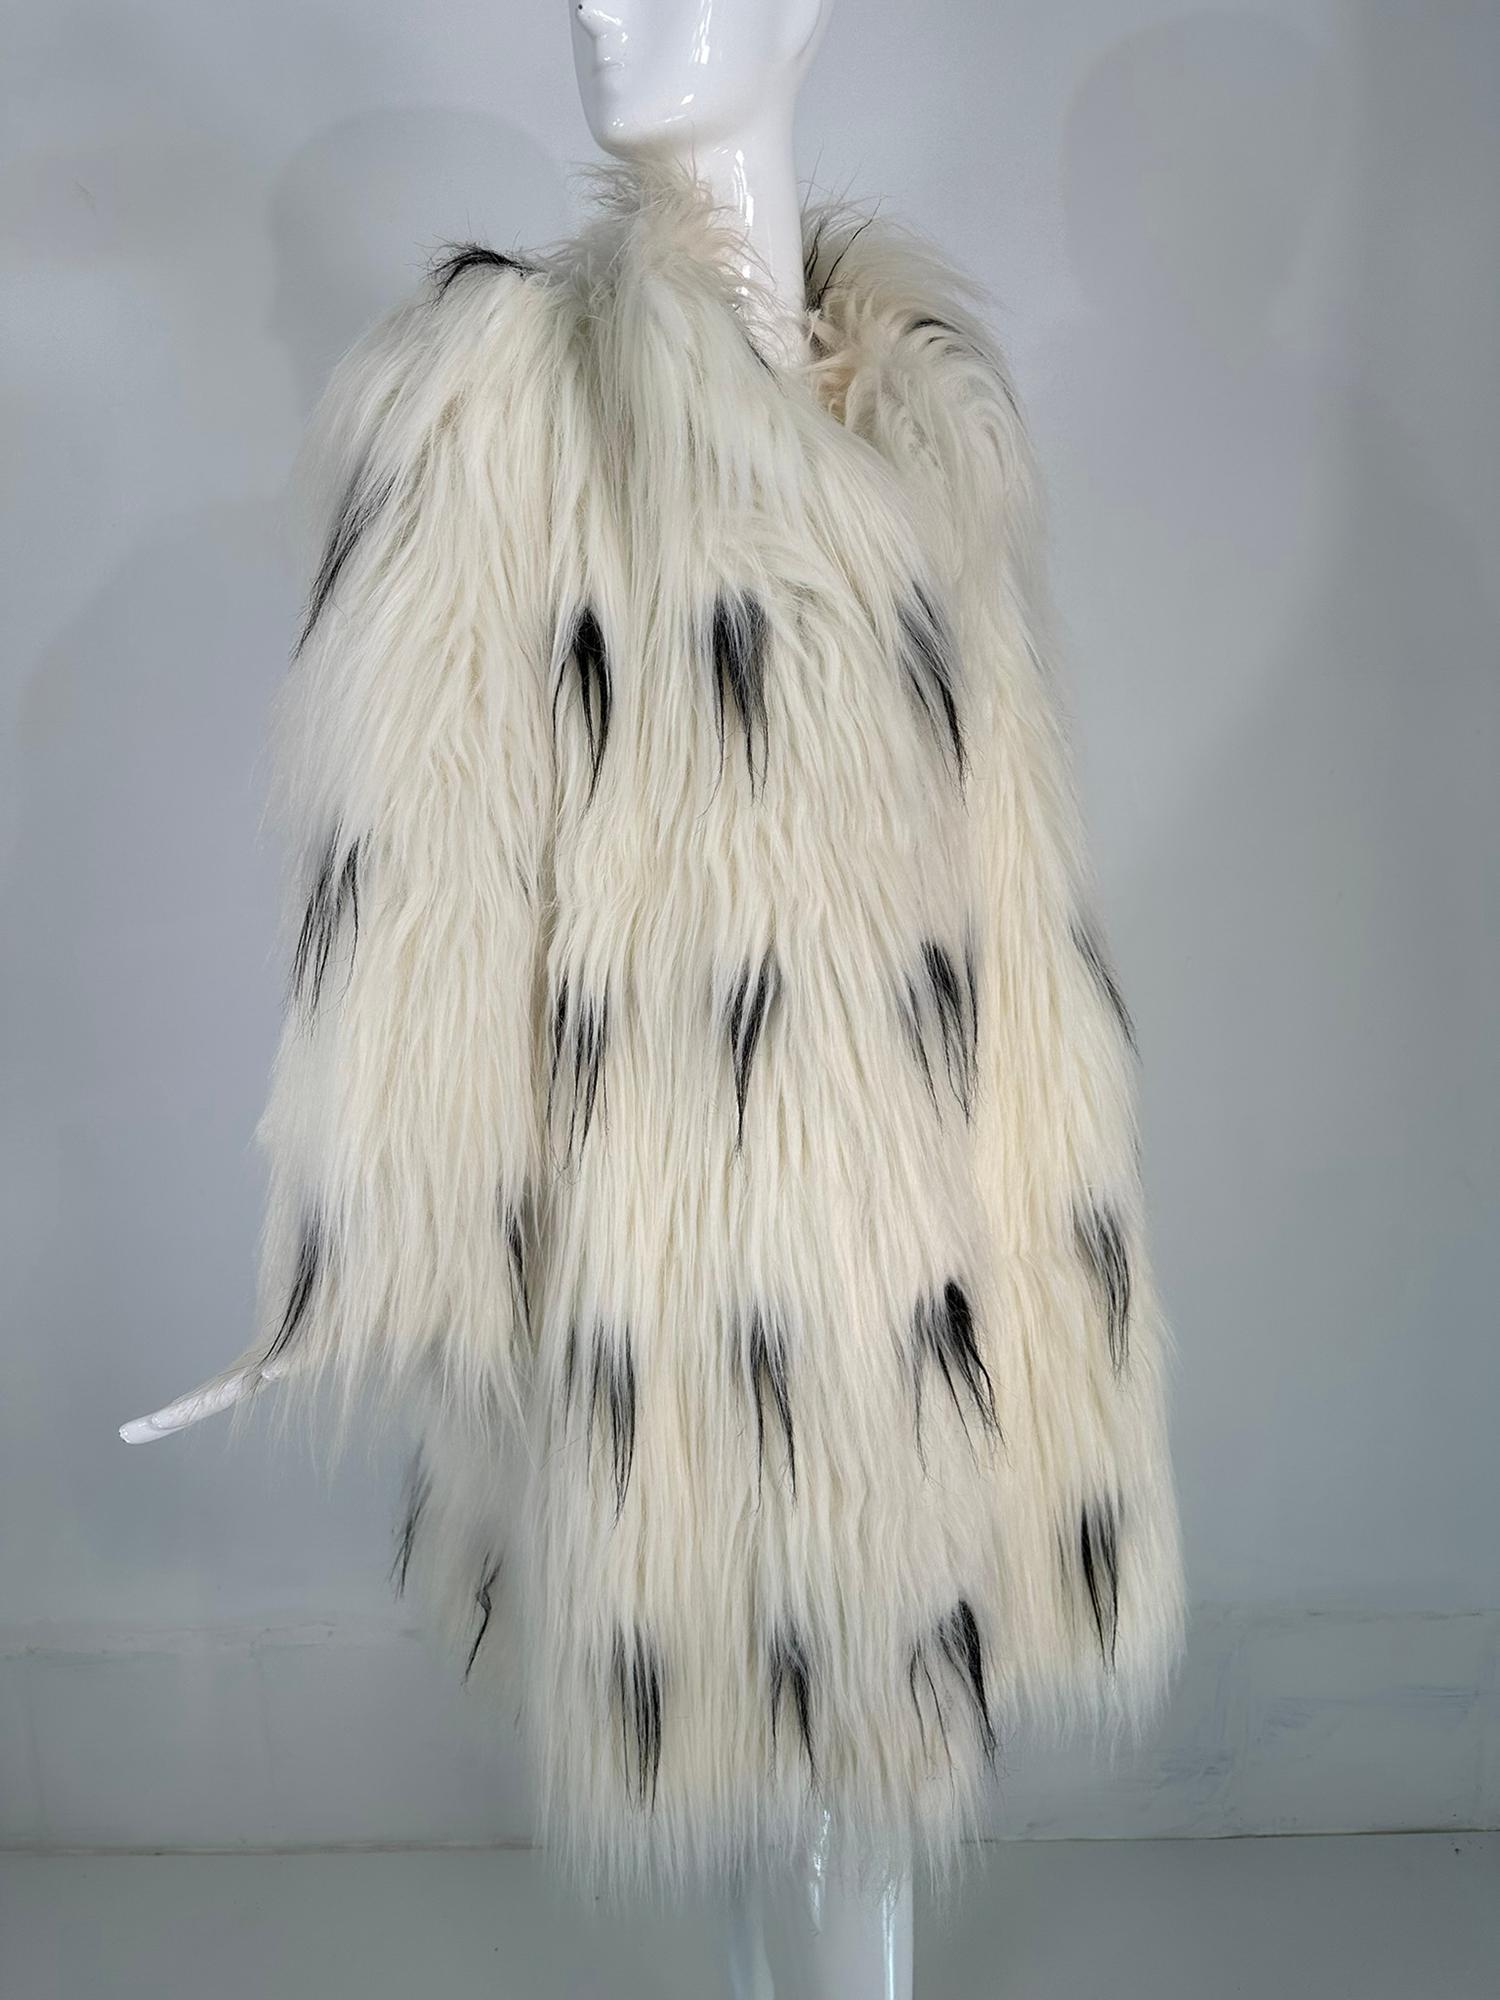 Pauline Trigere black & white shaggy faux fur coat from the 1980s, labeled 'A Trigere Coat'. This eye catching coat is a rare find and perfect for day or evening. Made from synthetic faux fur that looks like monkey or goat hair. Long 